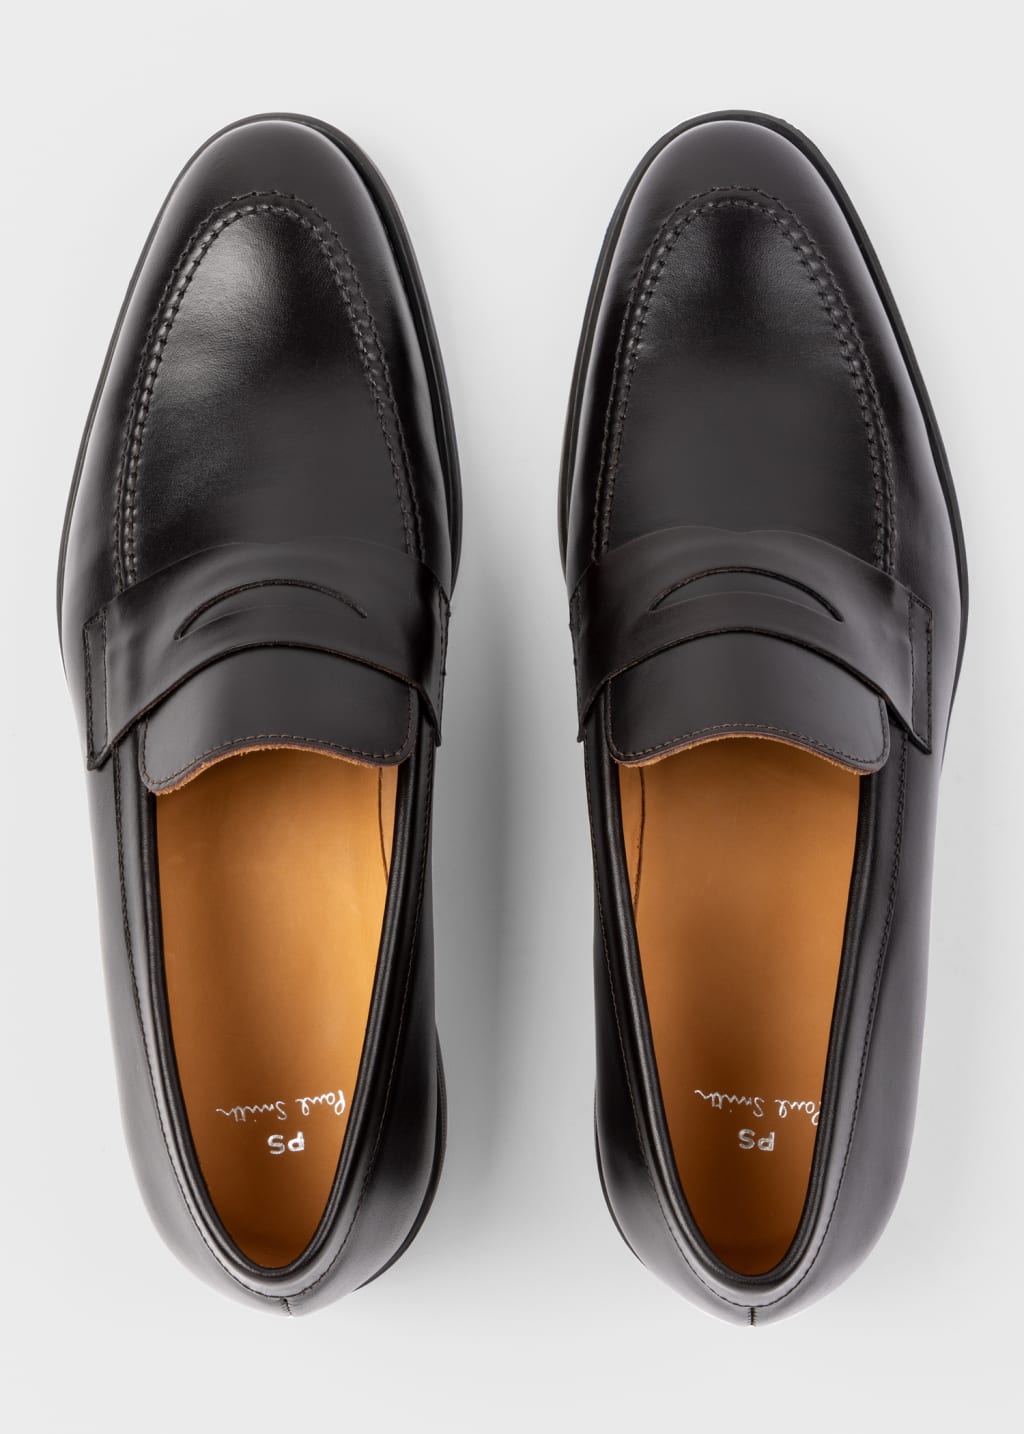 Detail View - Dark Brown Leather 'Remi' Loafers Paul Smith